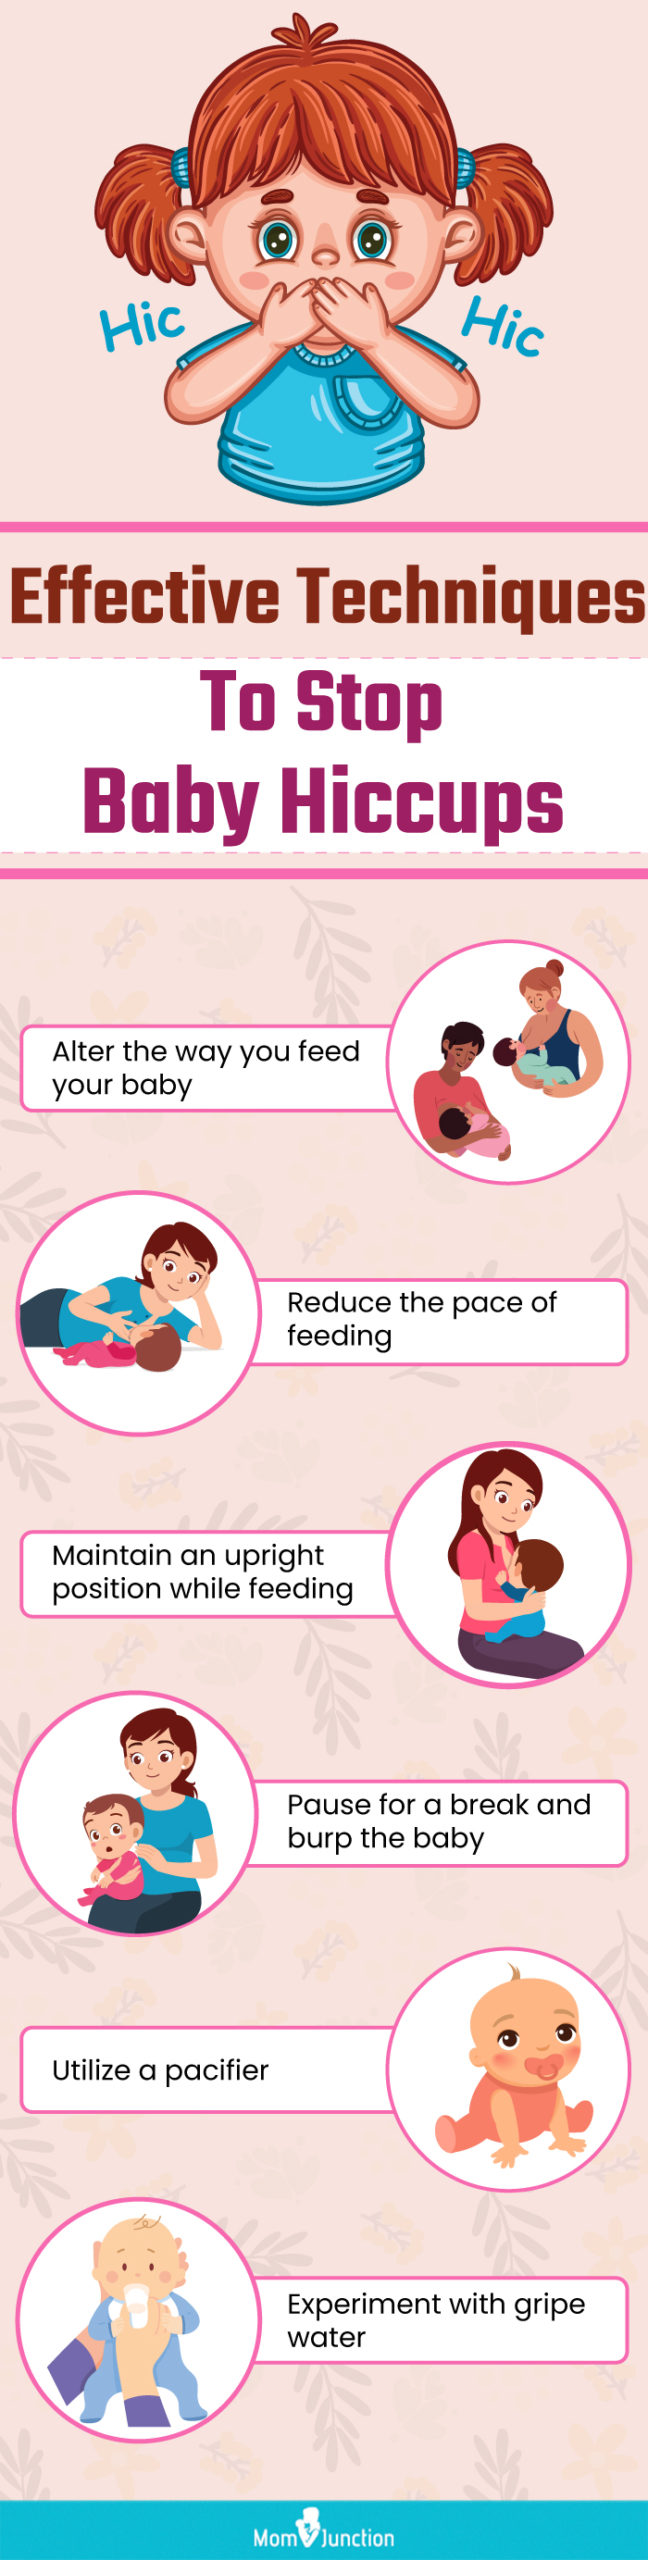 effective techniques to stop baby hiccups (infographic)